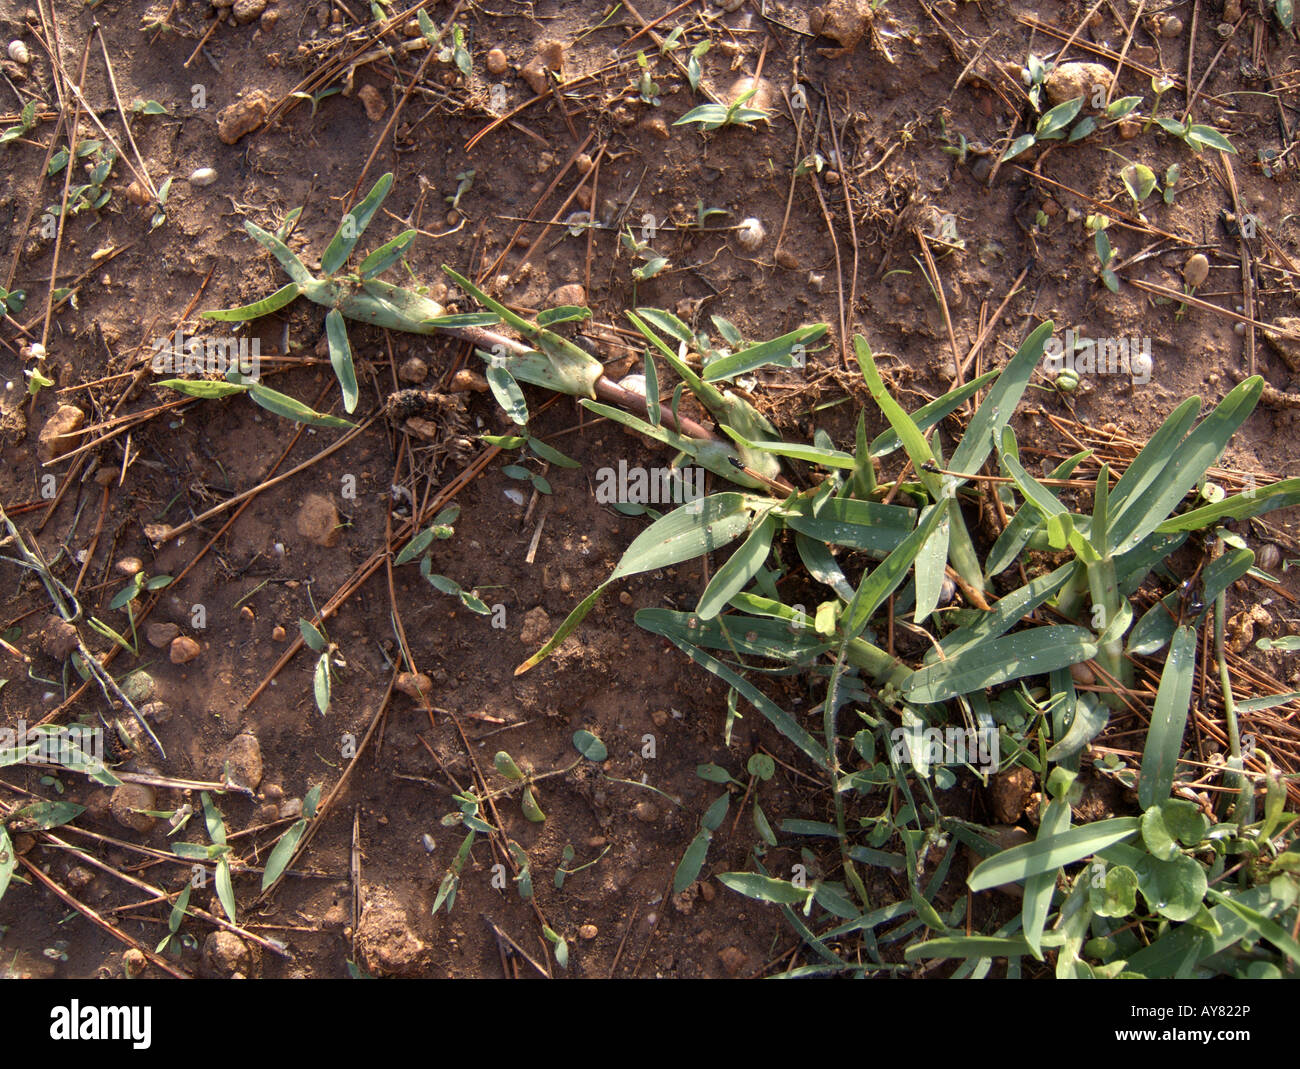 Lawn of couch grass "Elytrigia repens" (Synonyms: "Triticum repens L", "Agropyron repens", "P Beauv", "Elymus repens L Gould") Stock Photo